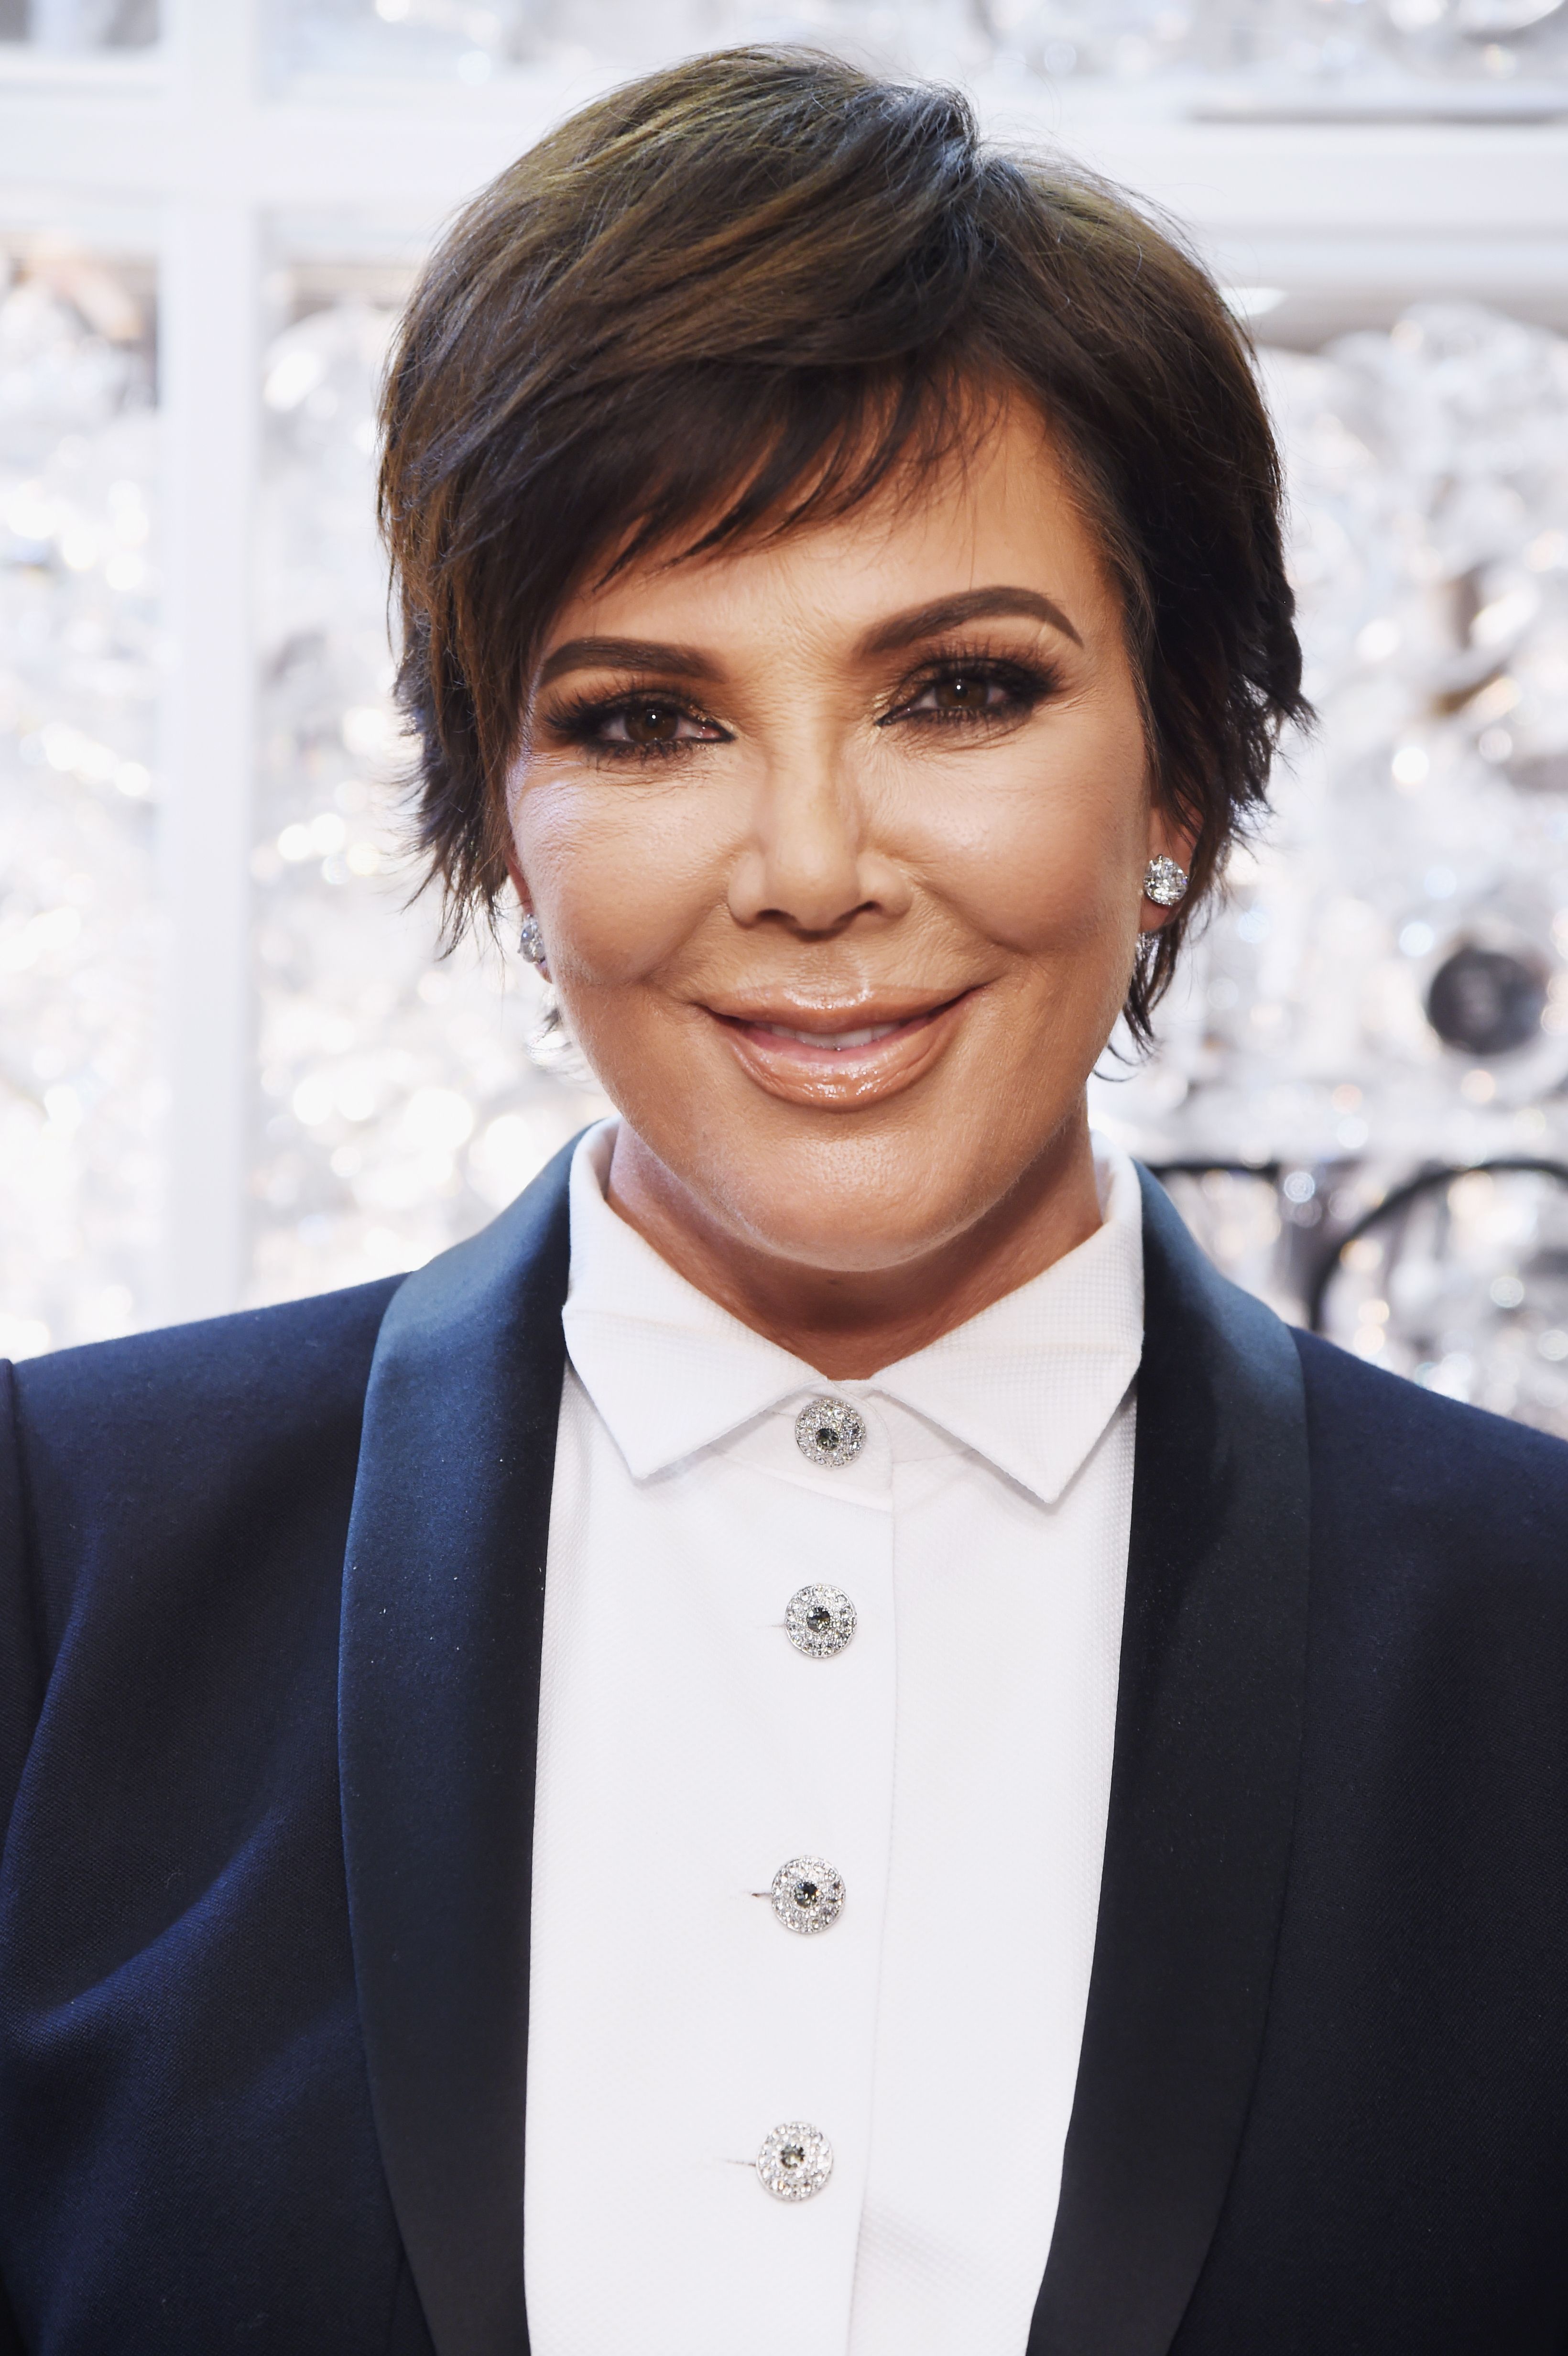 Kris Jenner at GEARYS Beverly Hills for the "Baccarat Takeover" on September 27, 2018, in Beverly Hills, California | Photo: Michael Kovac/Getty Images